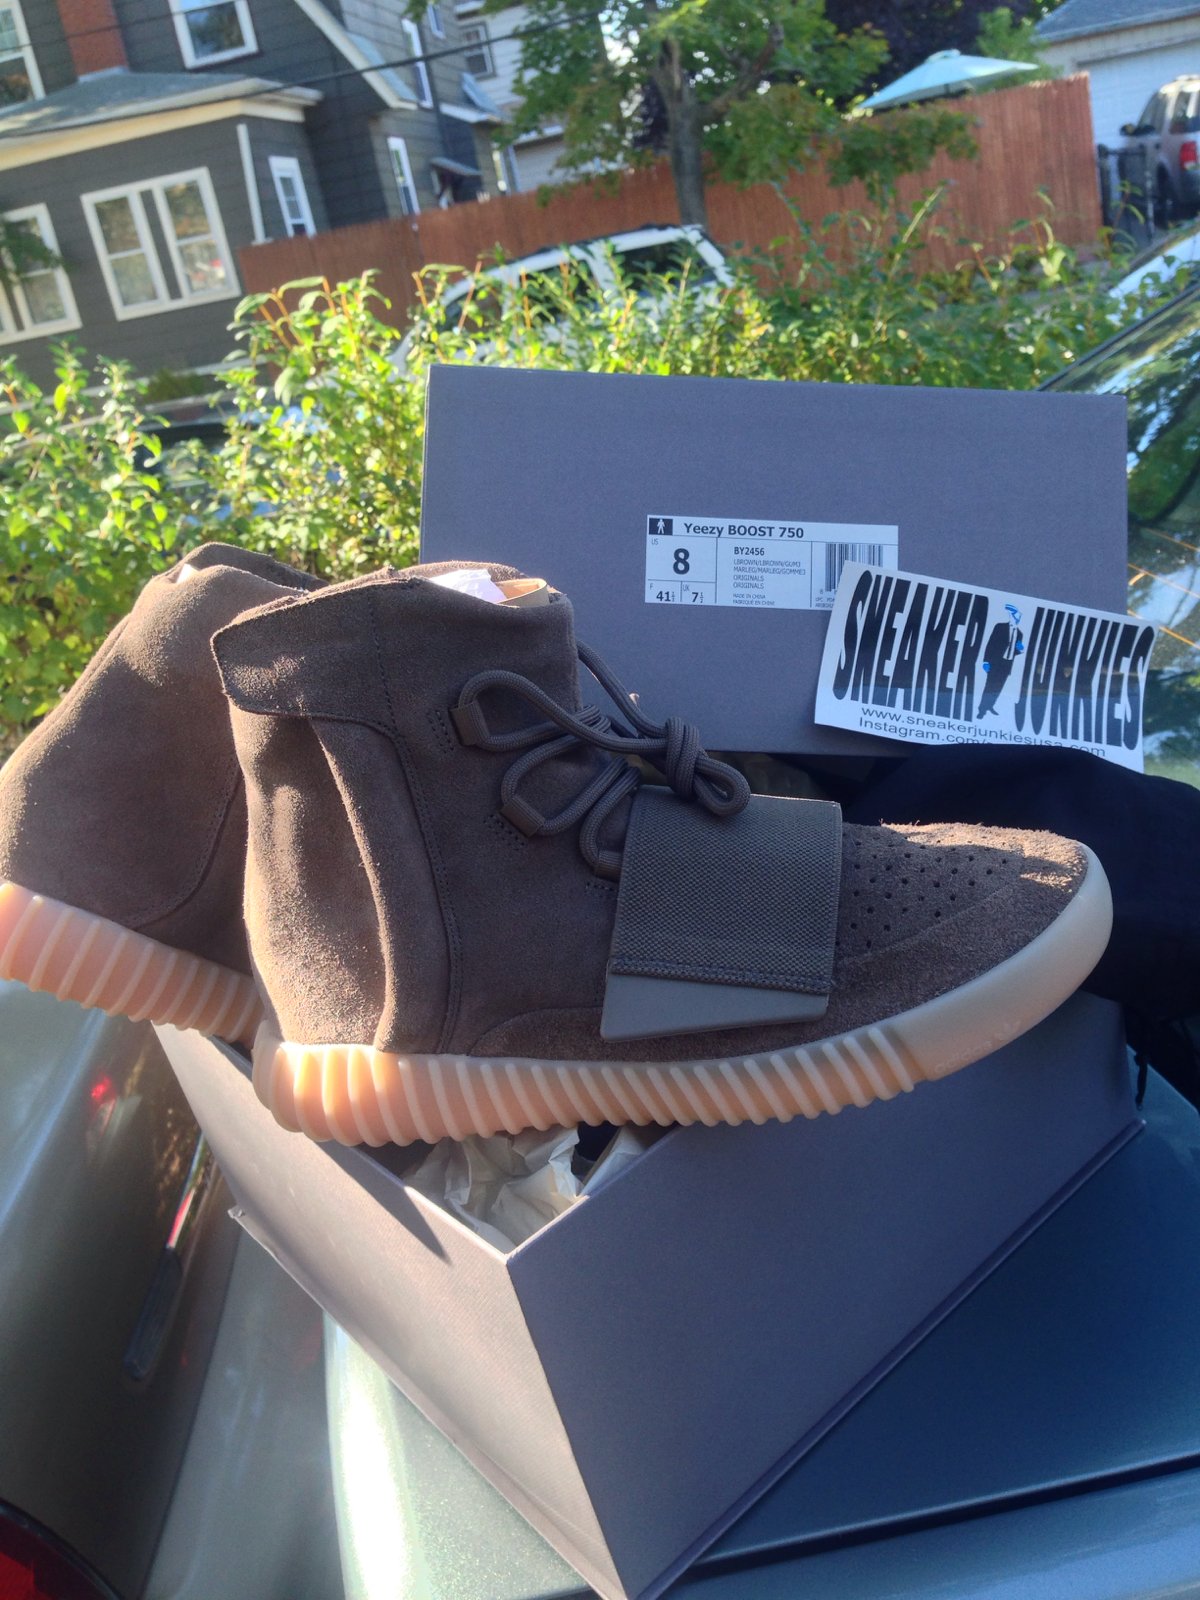 Yeezy Boost 750 Chocolate Brown Gum Size 8